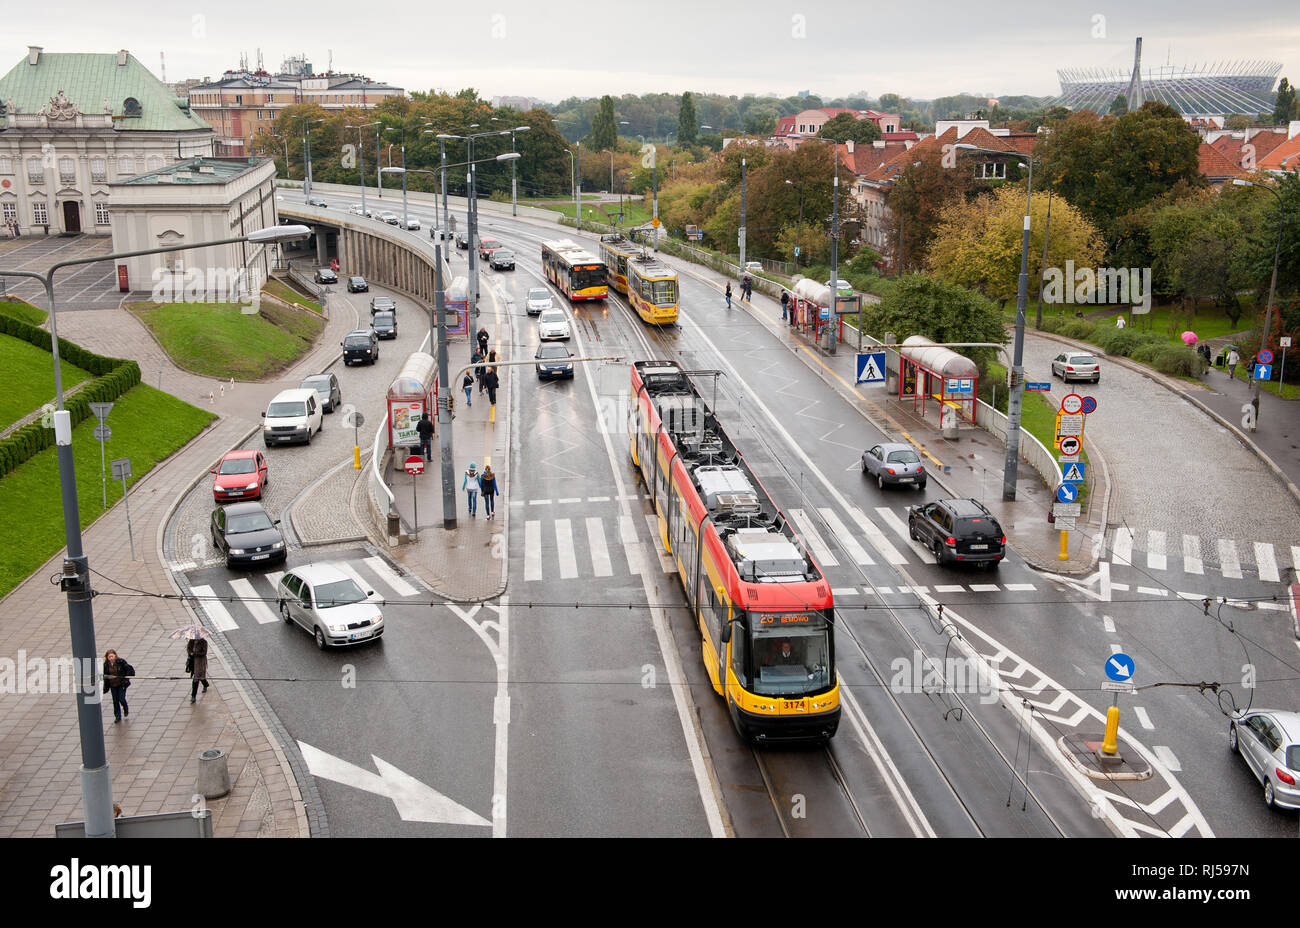 Cars buses and tramcars public transport in Warsaw view from Old Town, Rainy day, pedestrians walk on pavement, Trasa W-Z, Warsaw, Poland, Europe, Stock Photo